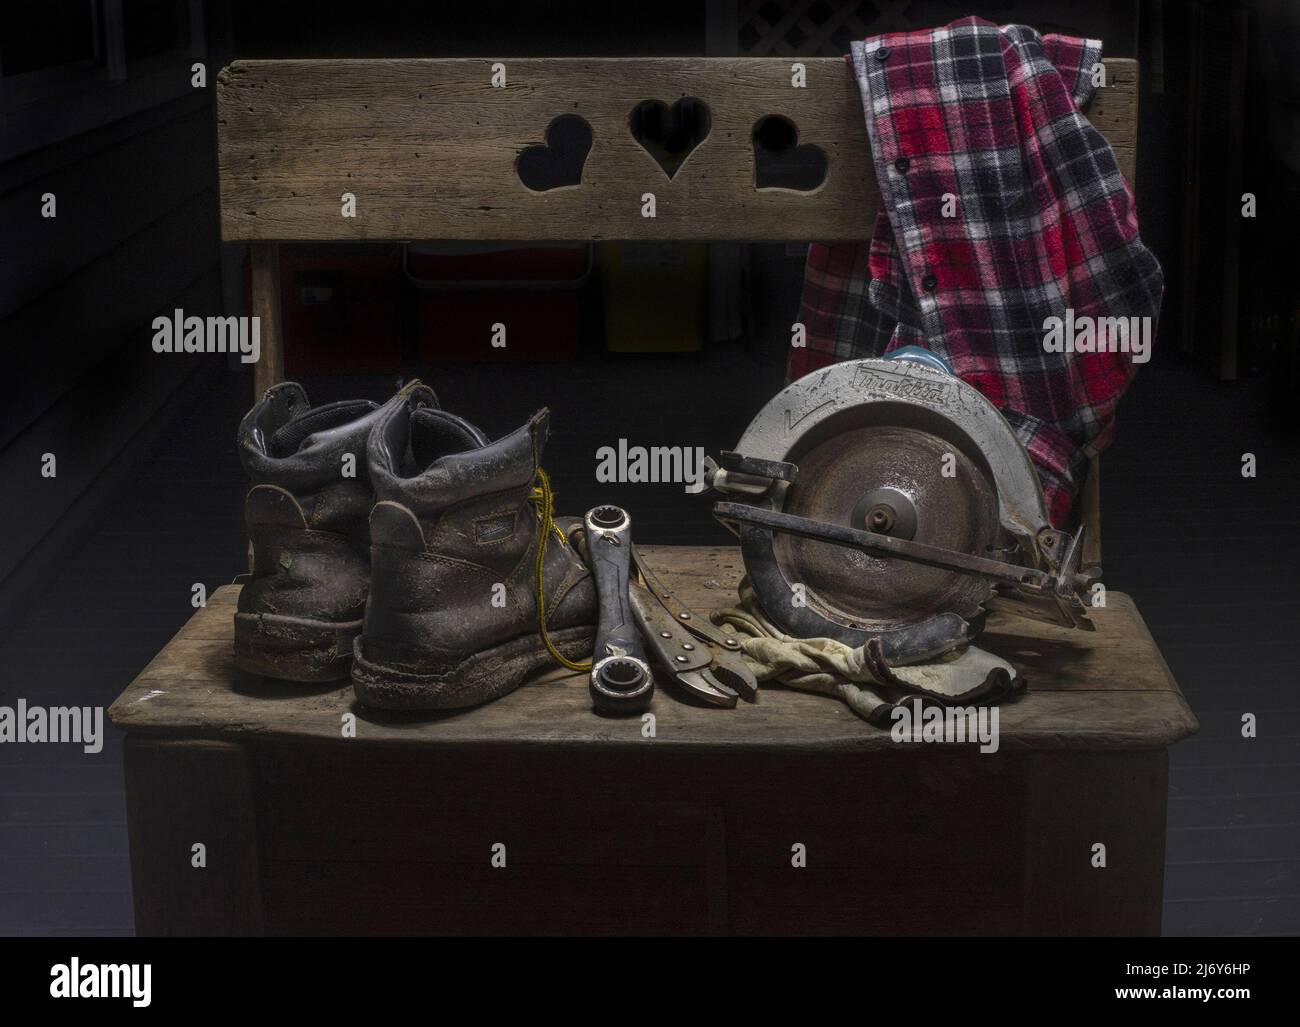 Boots, a circular saw, hand-tools and a work shirt placed on an old wooden storage box. Stock Photo